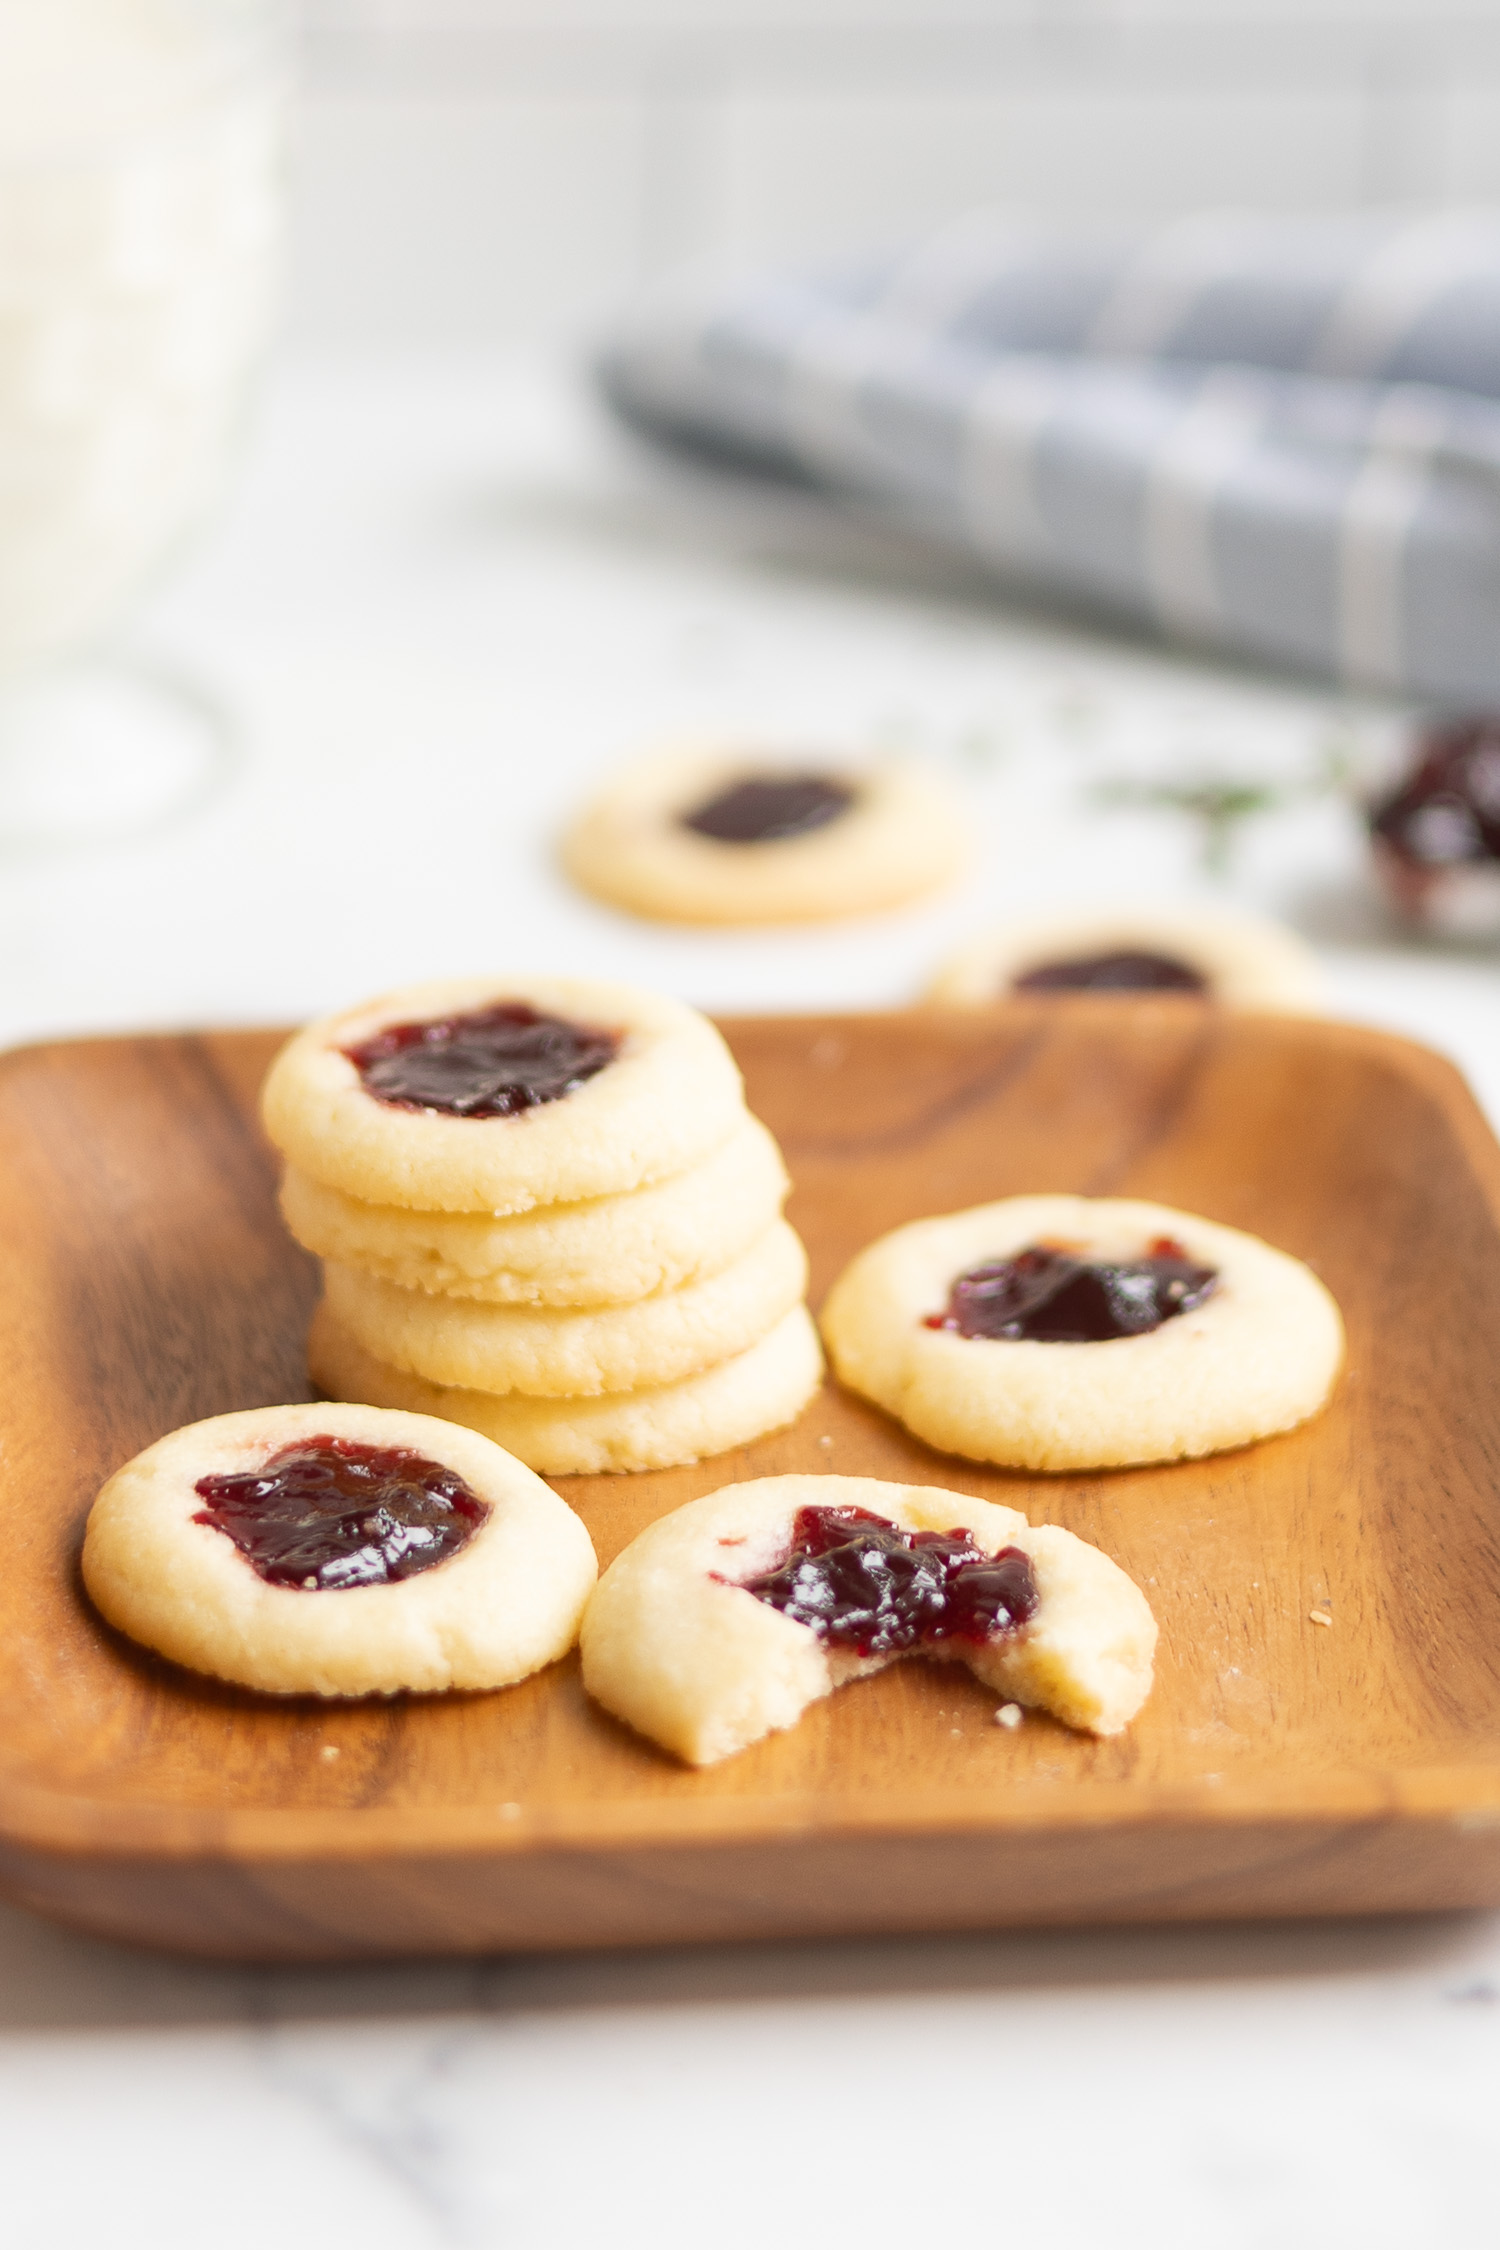 Thumbprint cookies on wood tray with glass of milk